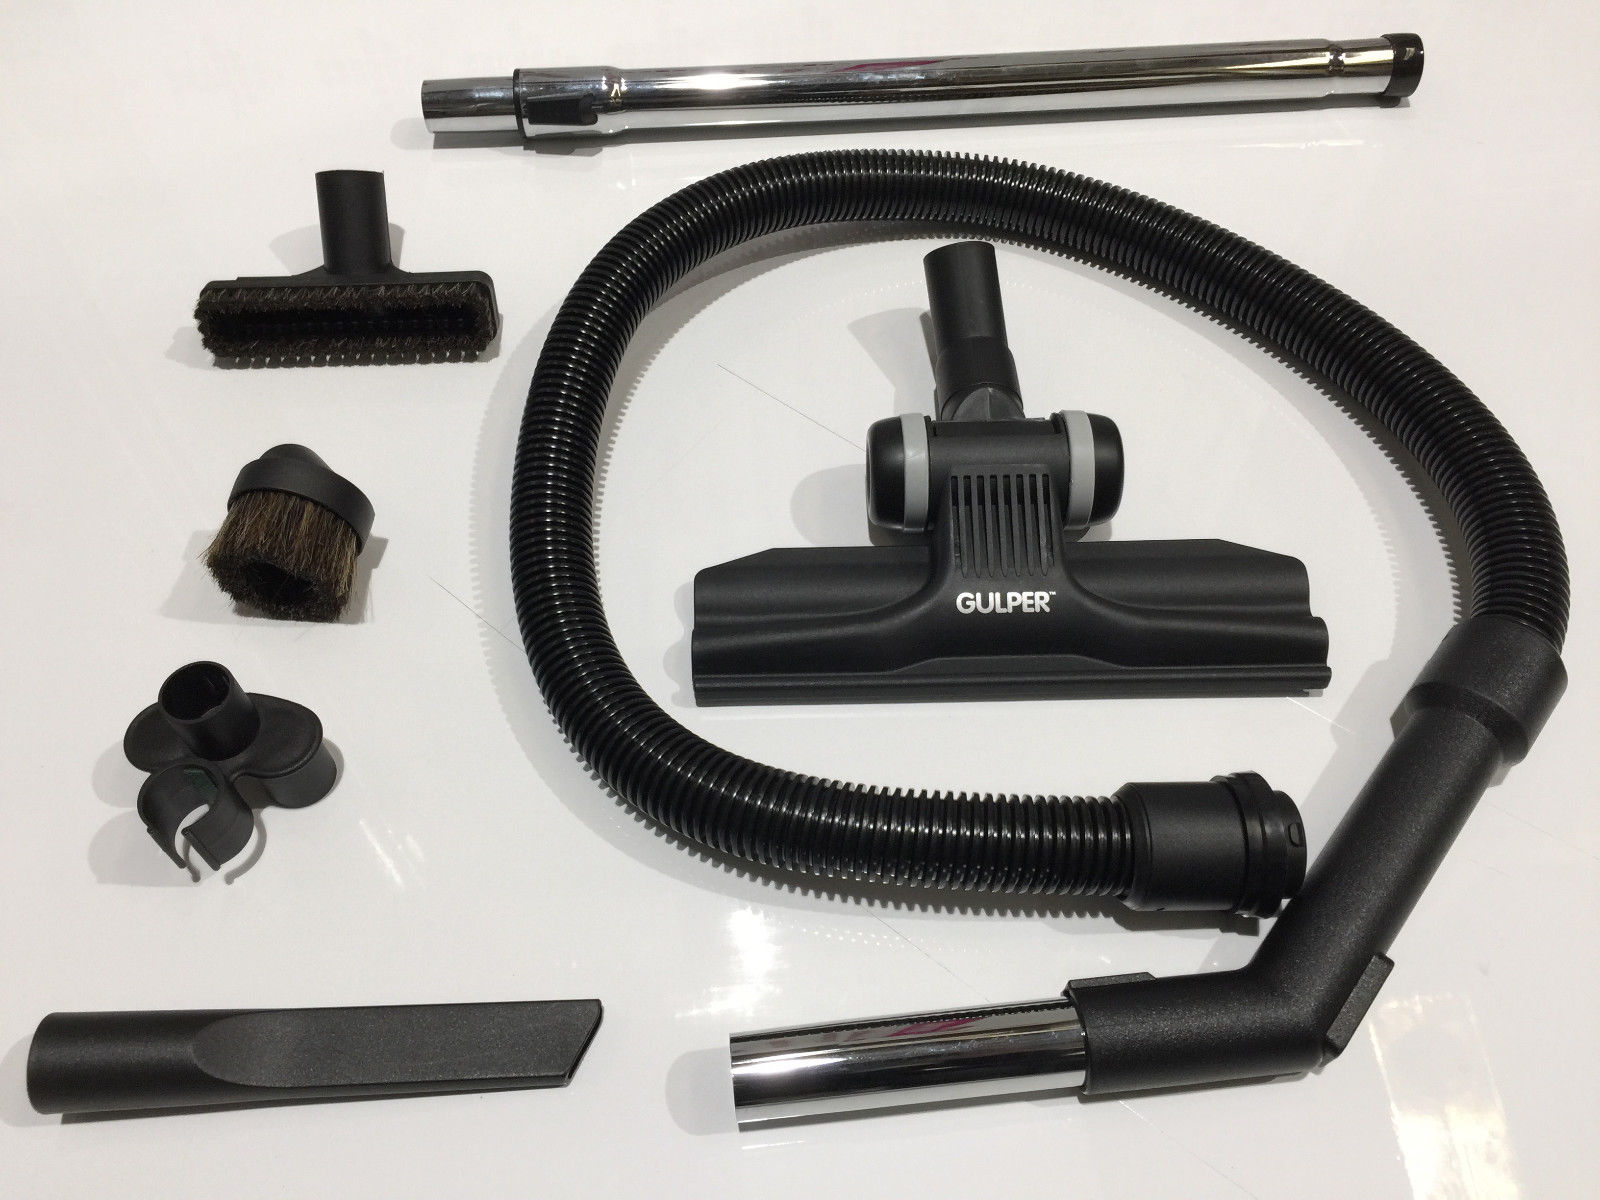 Pullman Pv10 Pv11 Pv12 Pv13 Pv14 Pv15 Backpack Vacuum Cleaner Hose Kit Complete Hose Kit With Tools Accessories Vac City